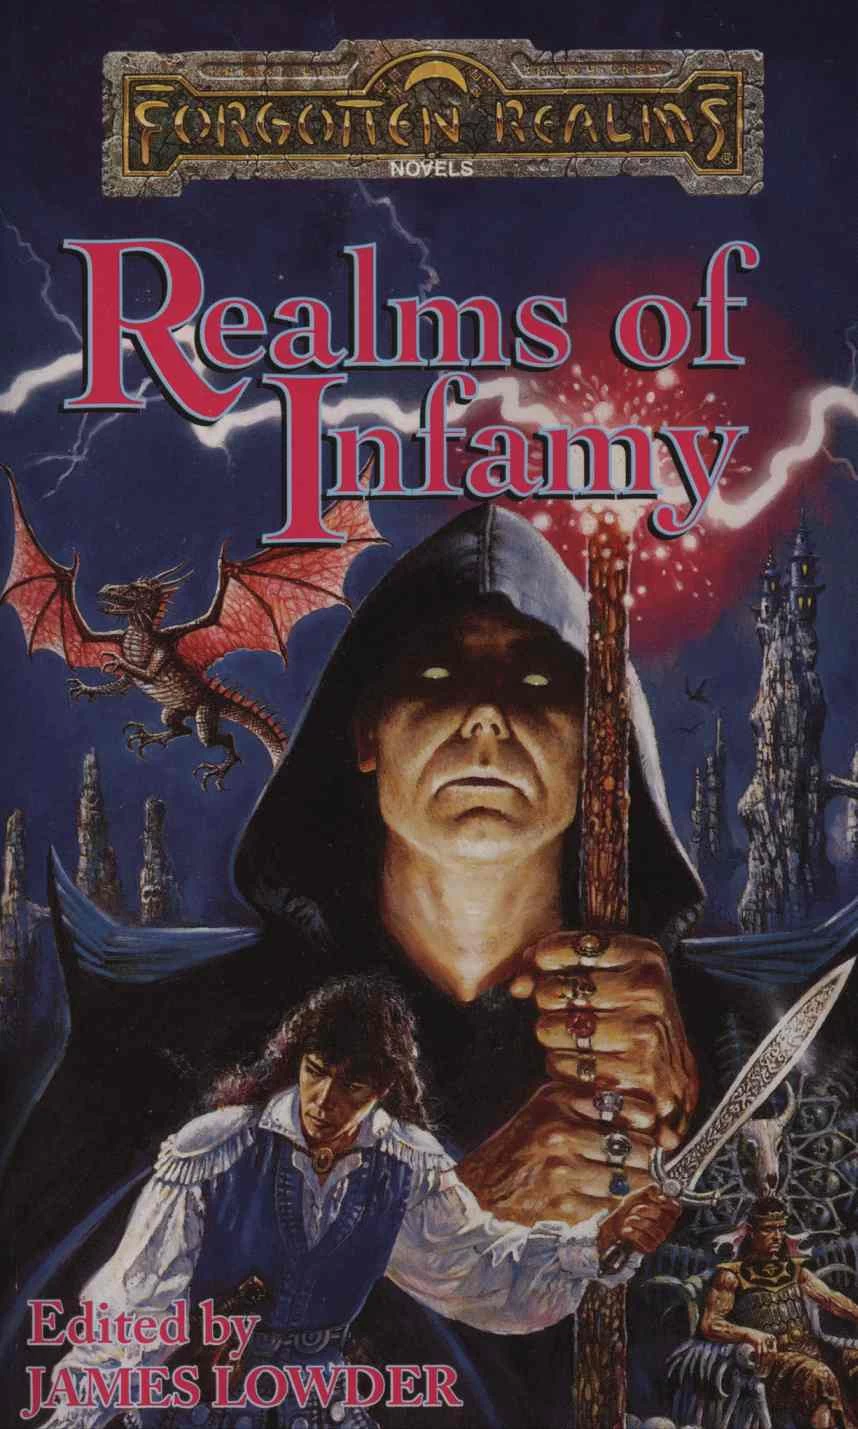 Realms of Infamy by James Lowder